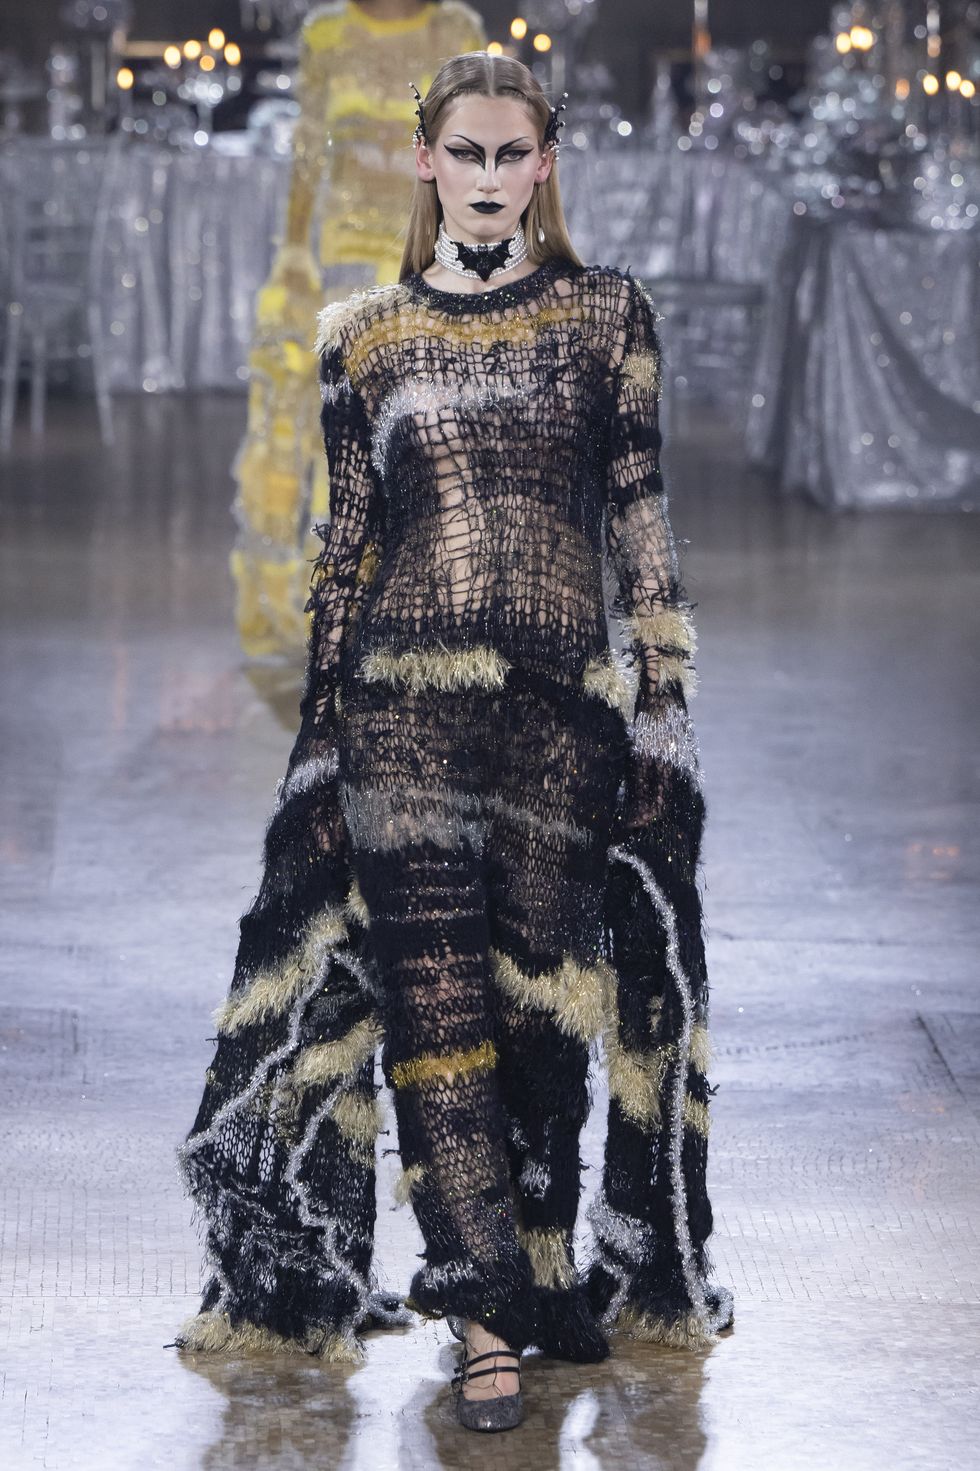 new york, usa february 10 a model walks the runway during the rodarte ready to wear fallwinter 2023 2024 fashion show as part of the new york fashion week on february 10, 2023 in ny photo by victor virgilegamma rapho via getty images